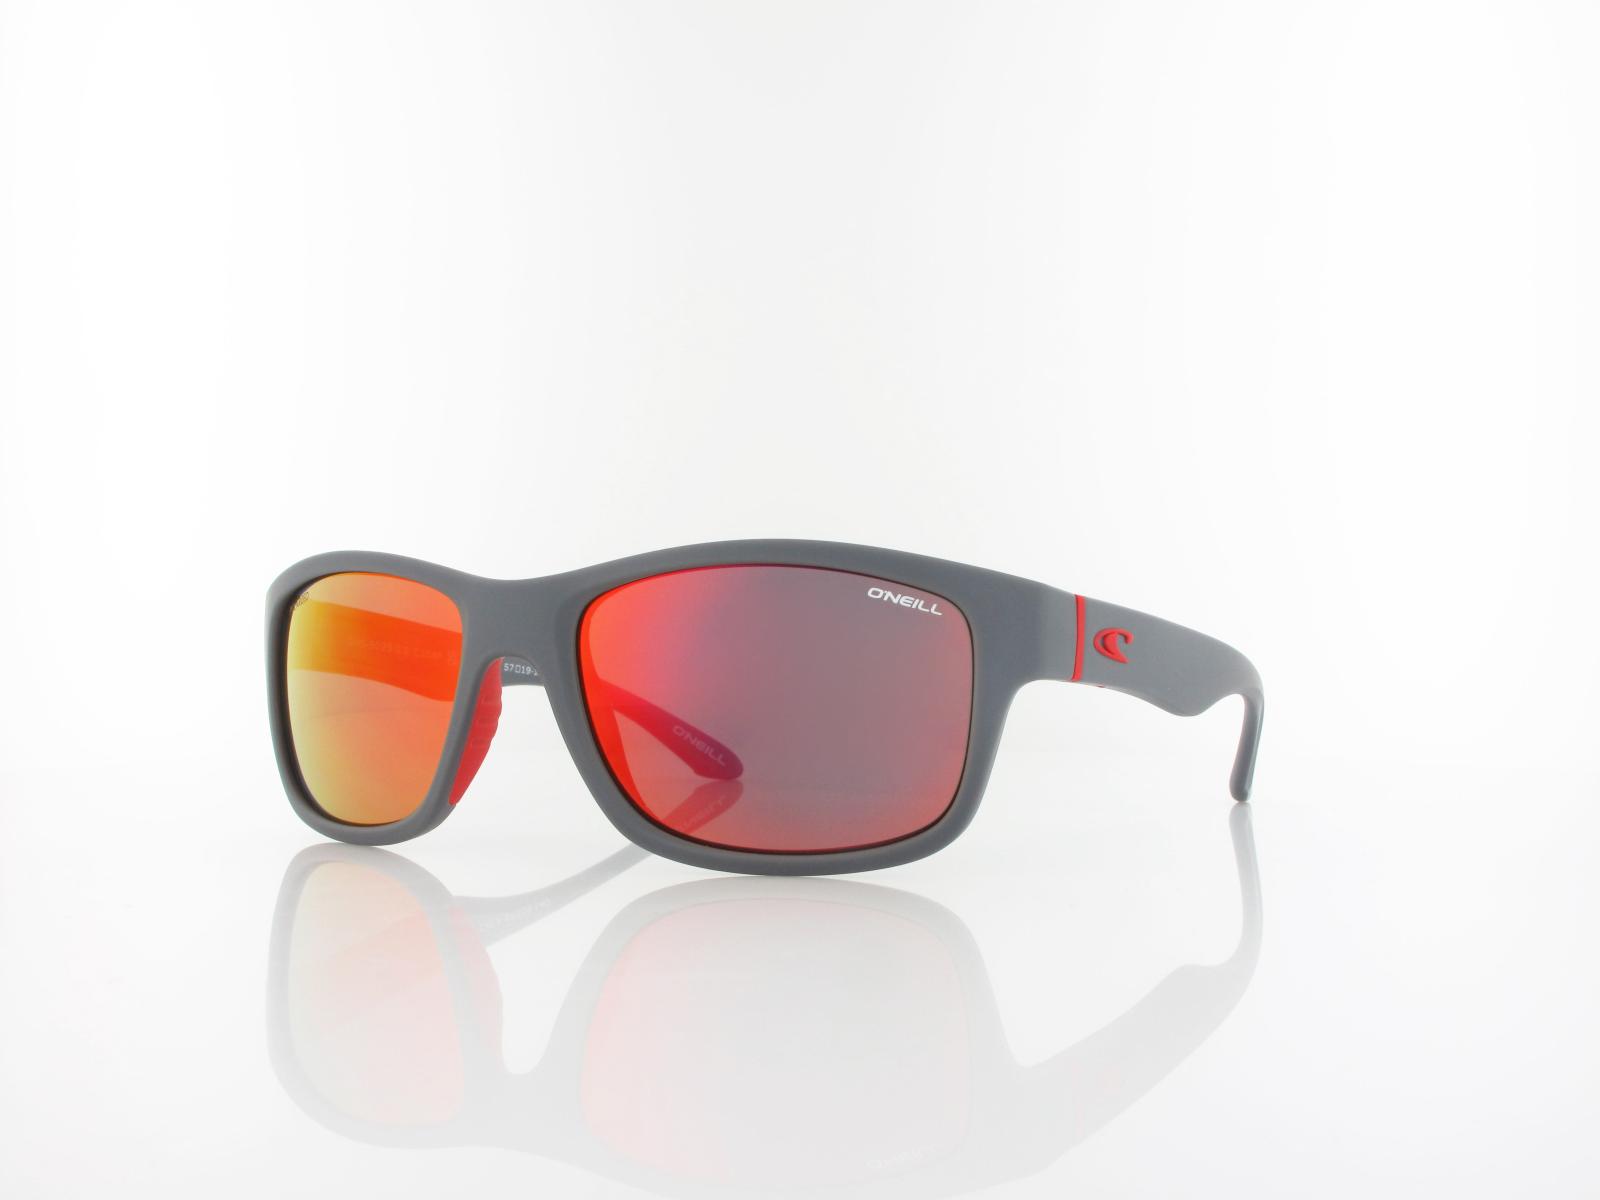 O'Neill | ONS 9029 2.0 108P 57 | matte grey red / red mirror polarized